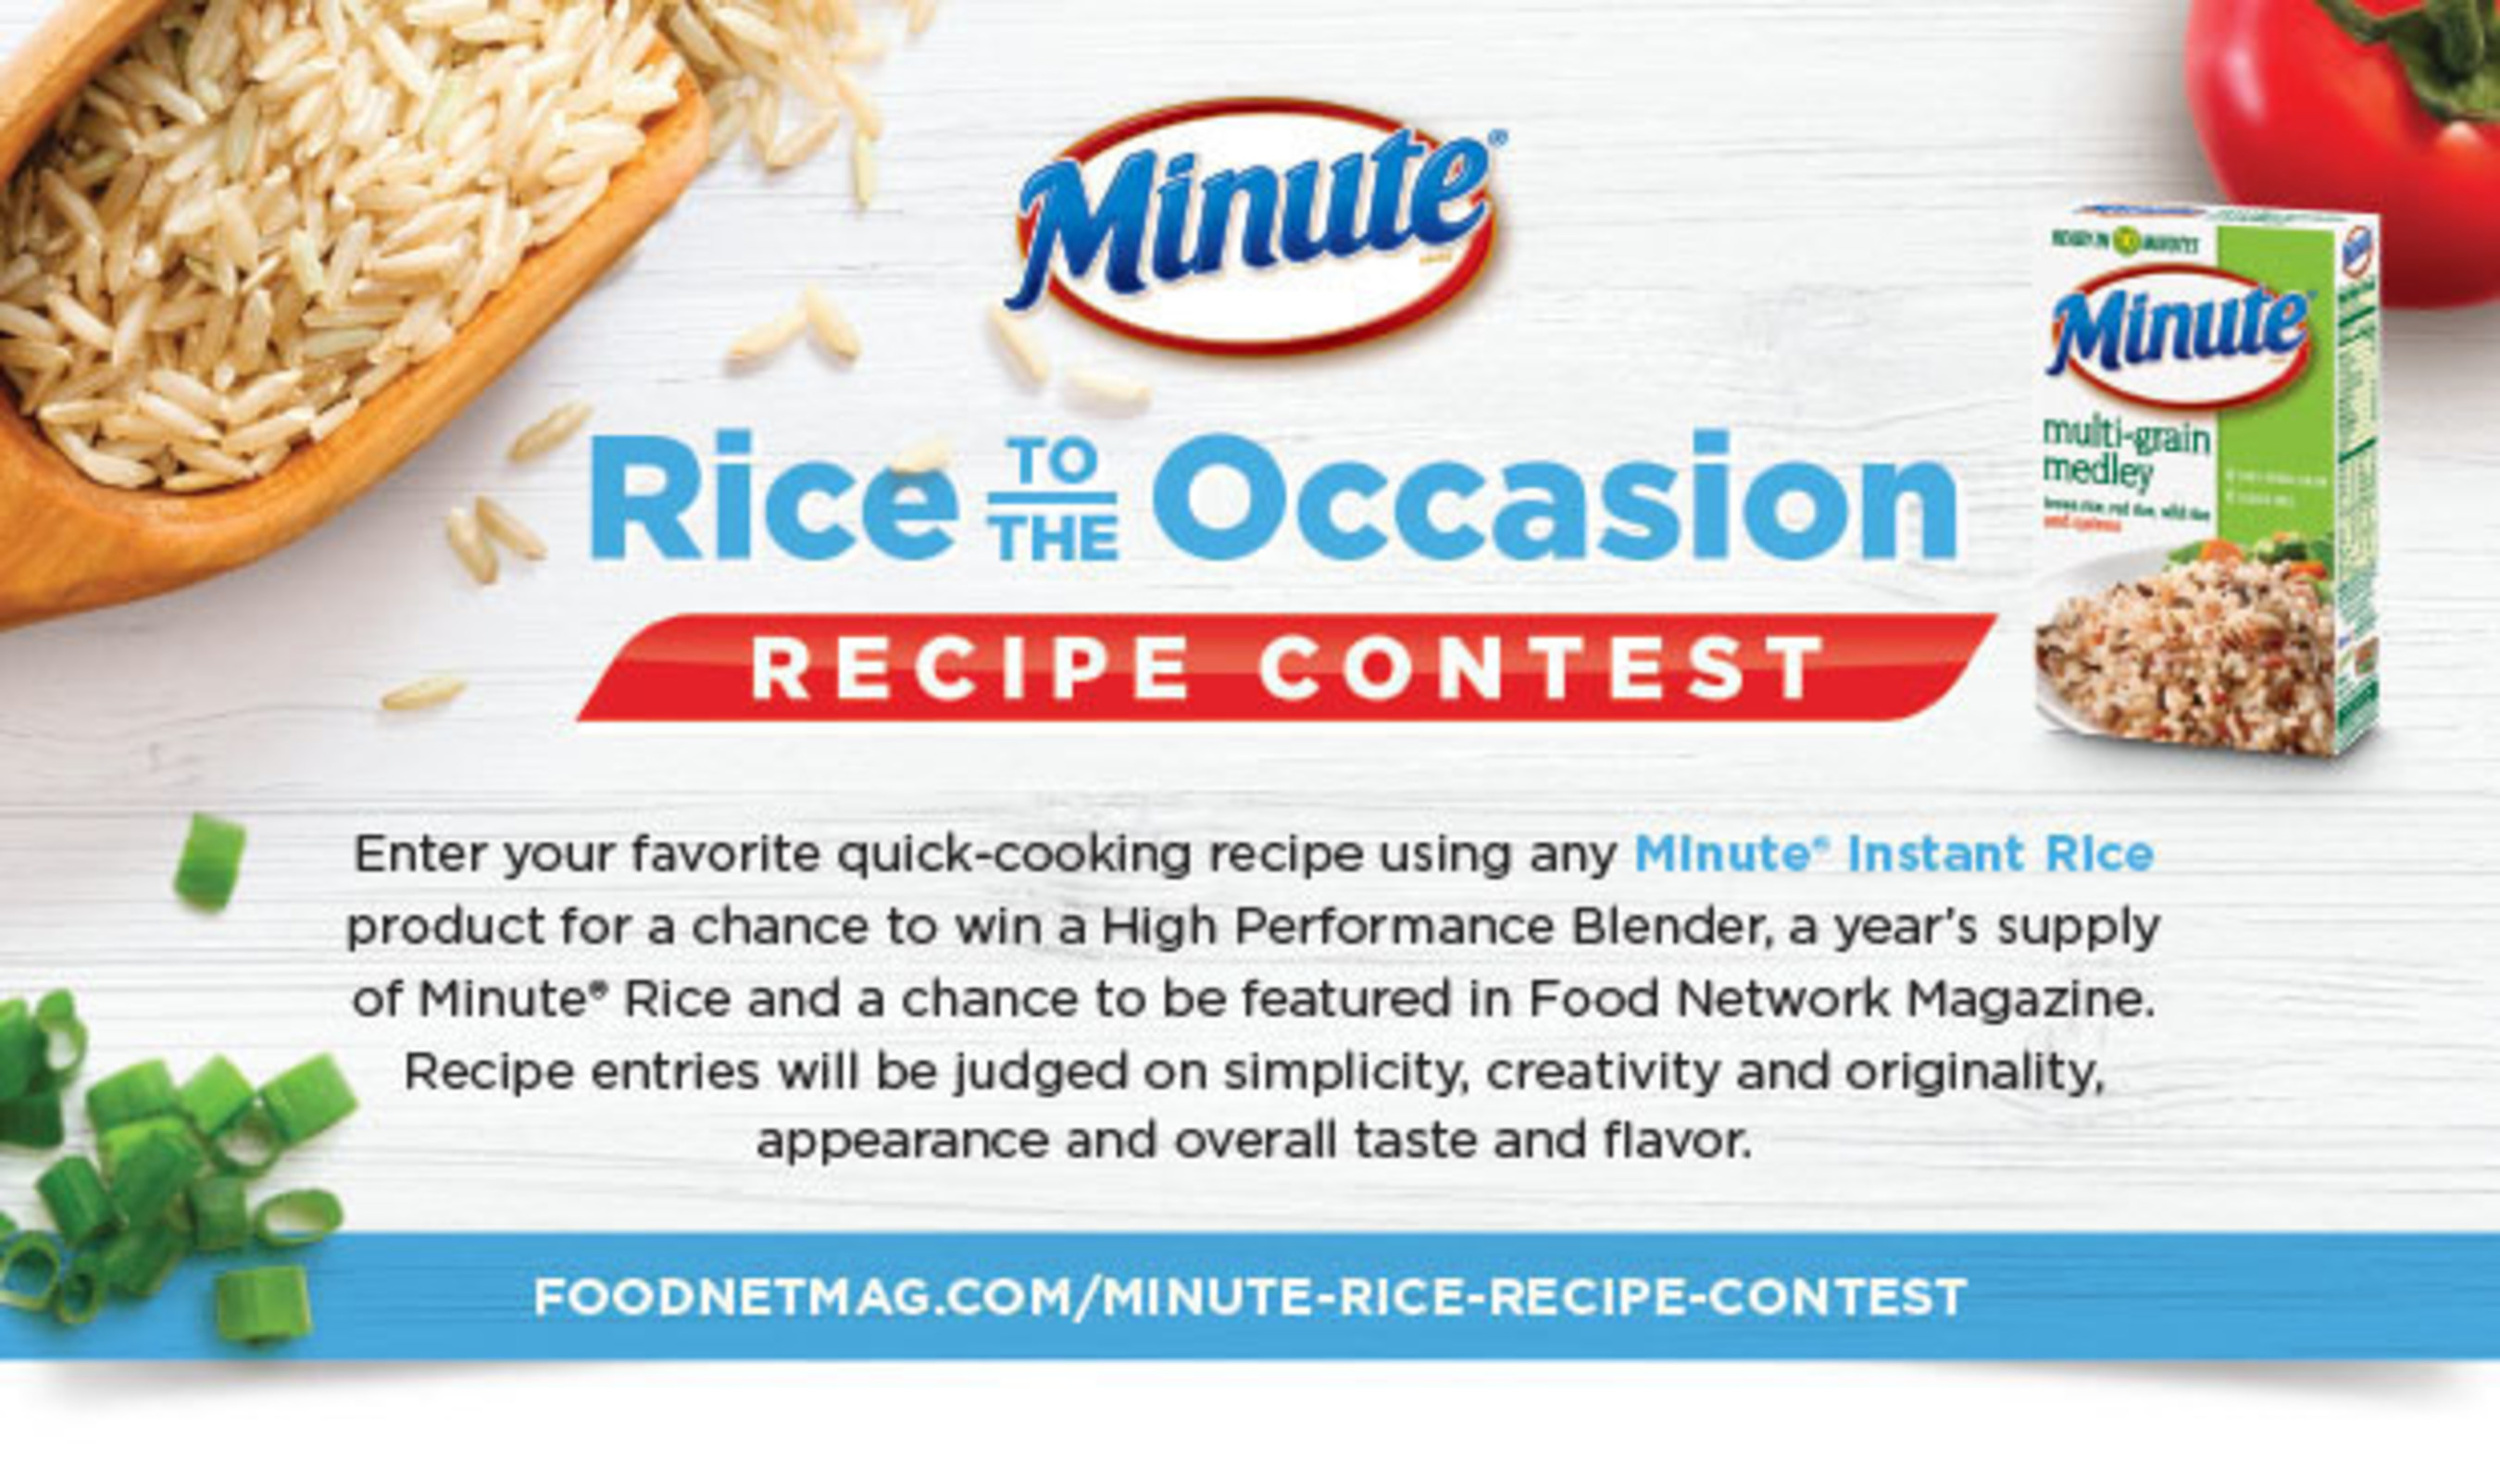 Through September 5, Minute(R) Rice is hosting the "Rice to the Occasion" Recipe Contest. The contest, as seen in the August issue of Food Network Magazine, invites homecooks to enter their favorite quick-cooking recipe using any Minute Instant Rice product for a chance to win a High Performance Blender, a year's supply of Minute Rice, and a chance to be featured in Food Network Magazine. Entrants can submit recipes at http://www.foodnetmag.com/minute-rice-recipe-contest.